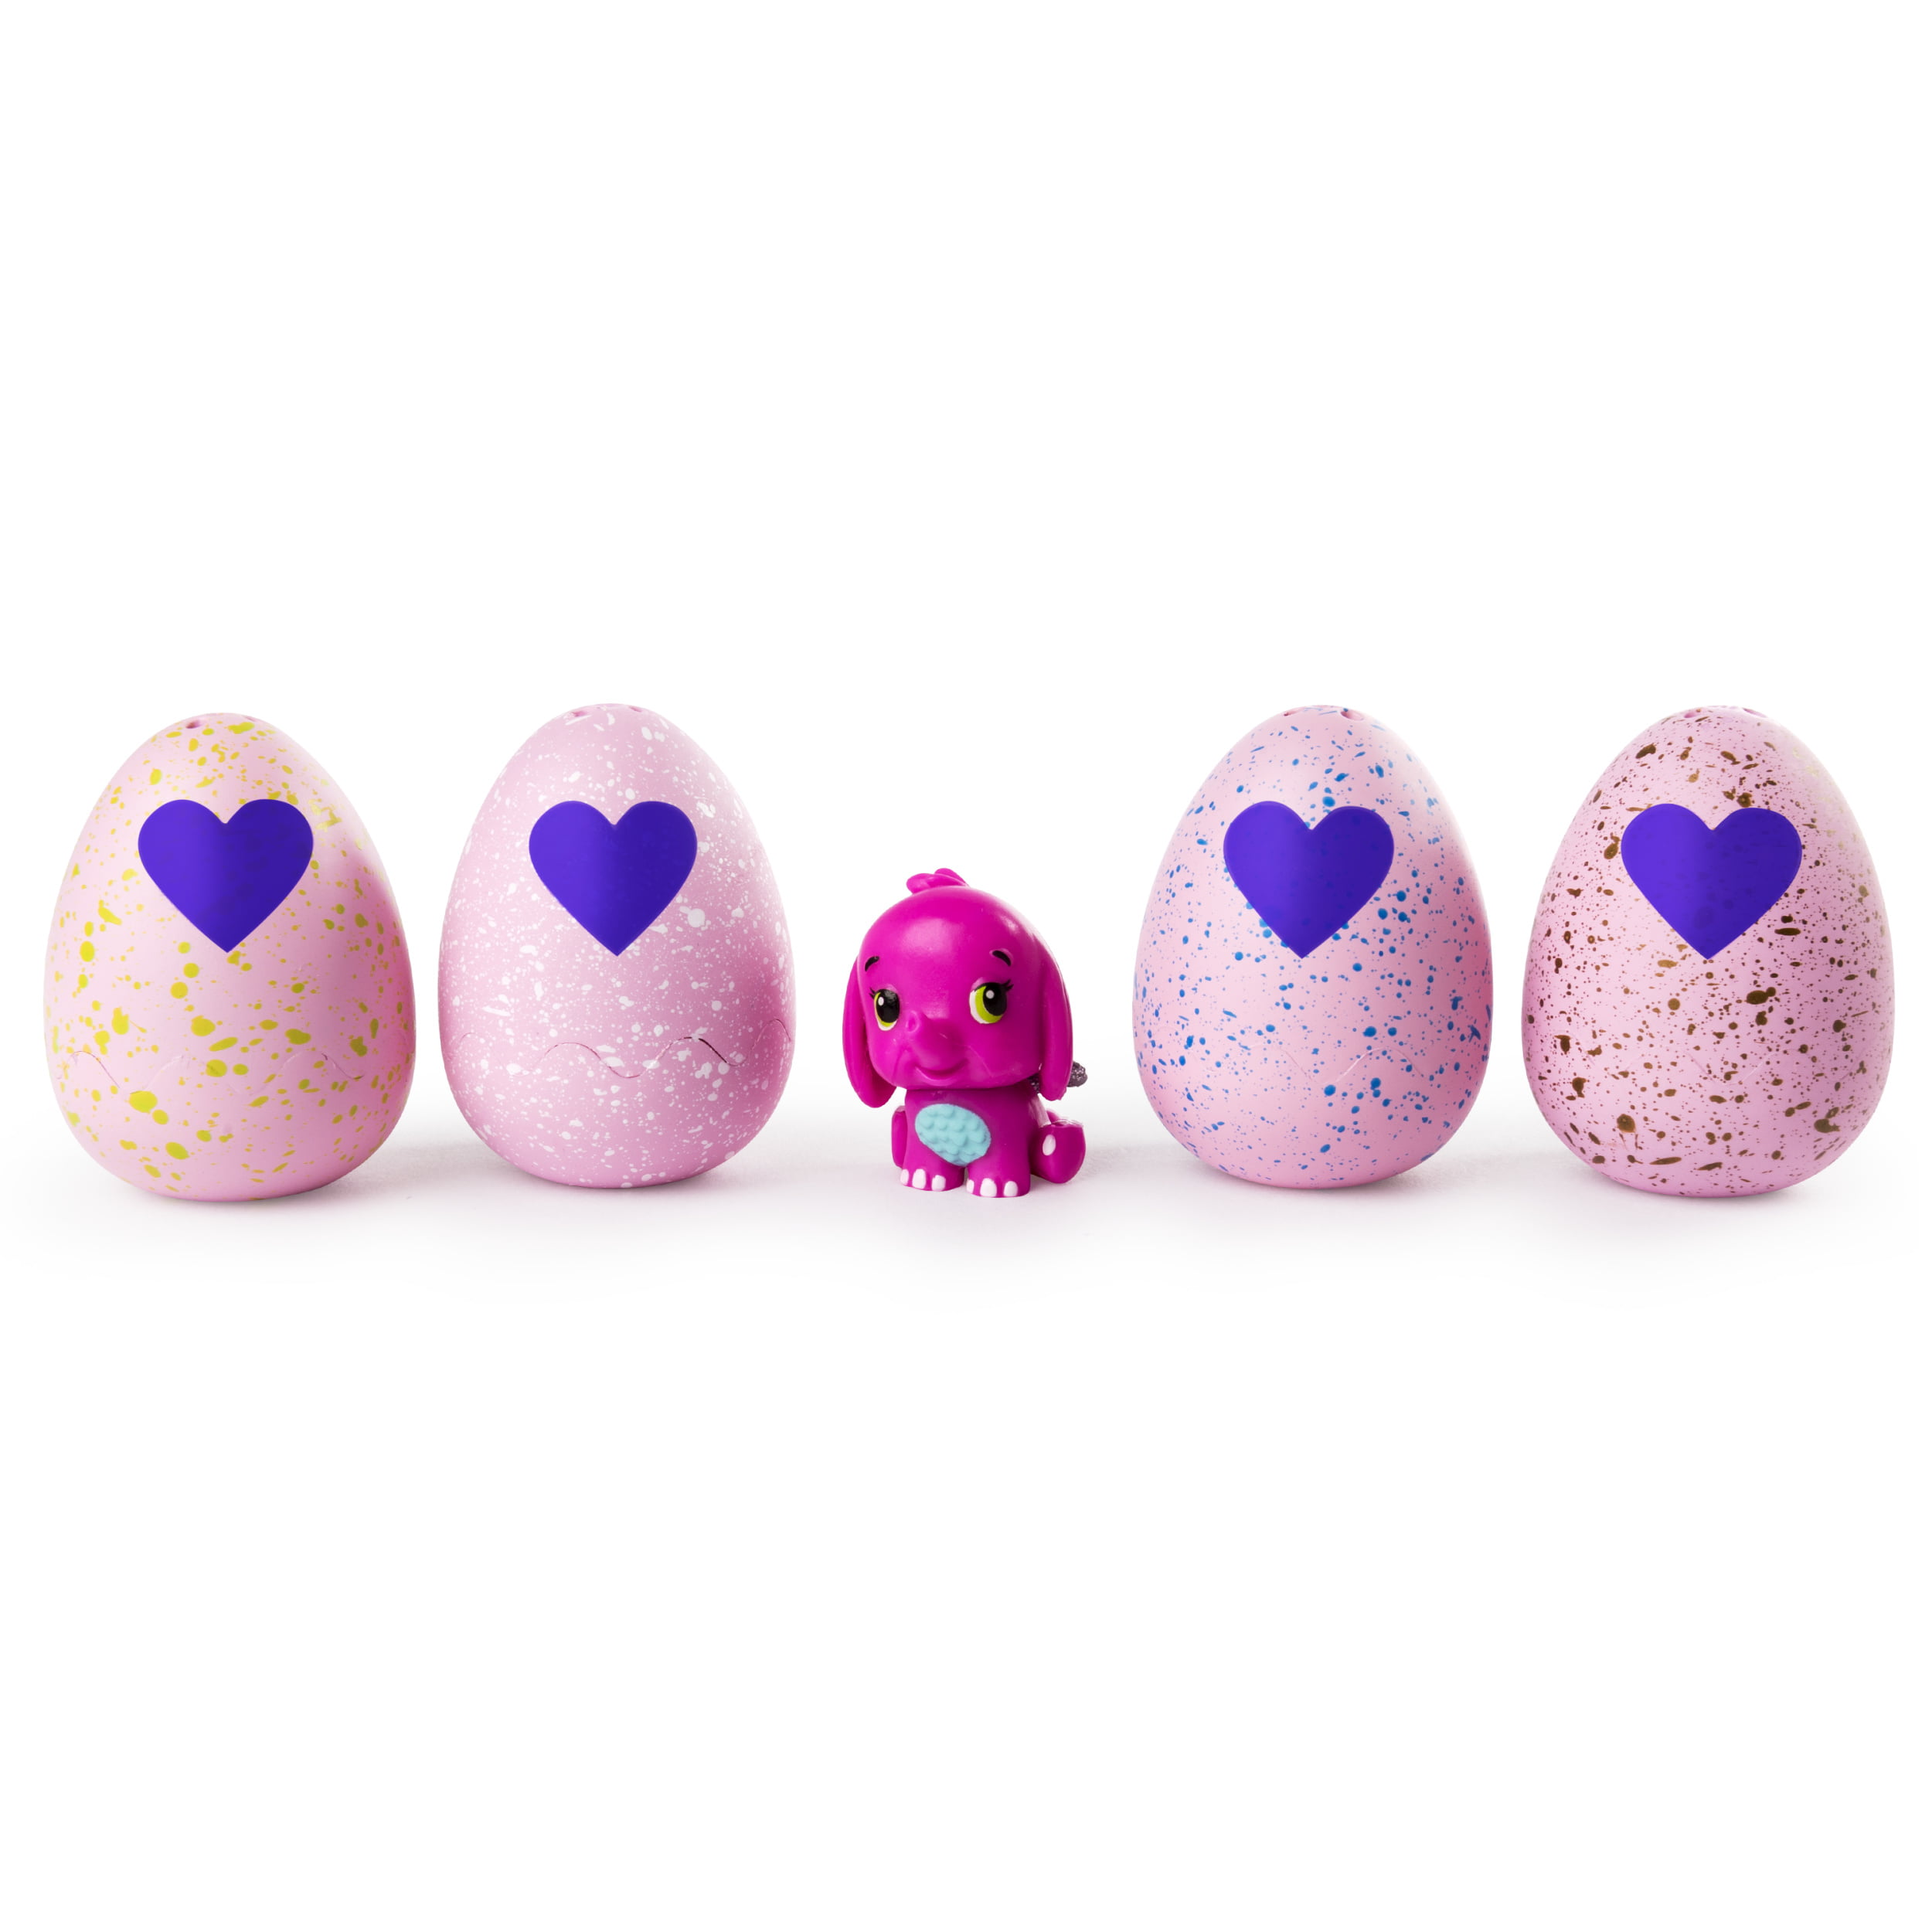 Hatchimals Colleggtibles 4-pack Bonus From Season 1 by Spin Master for sale online 